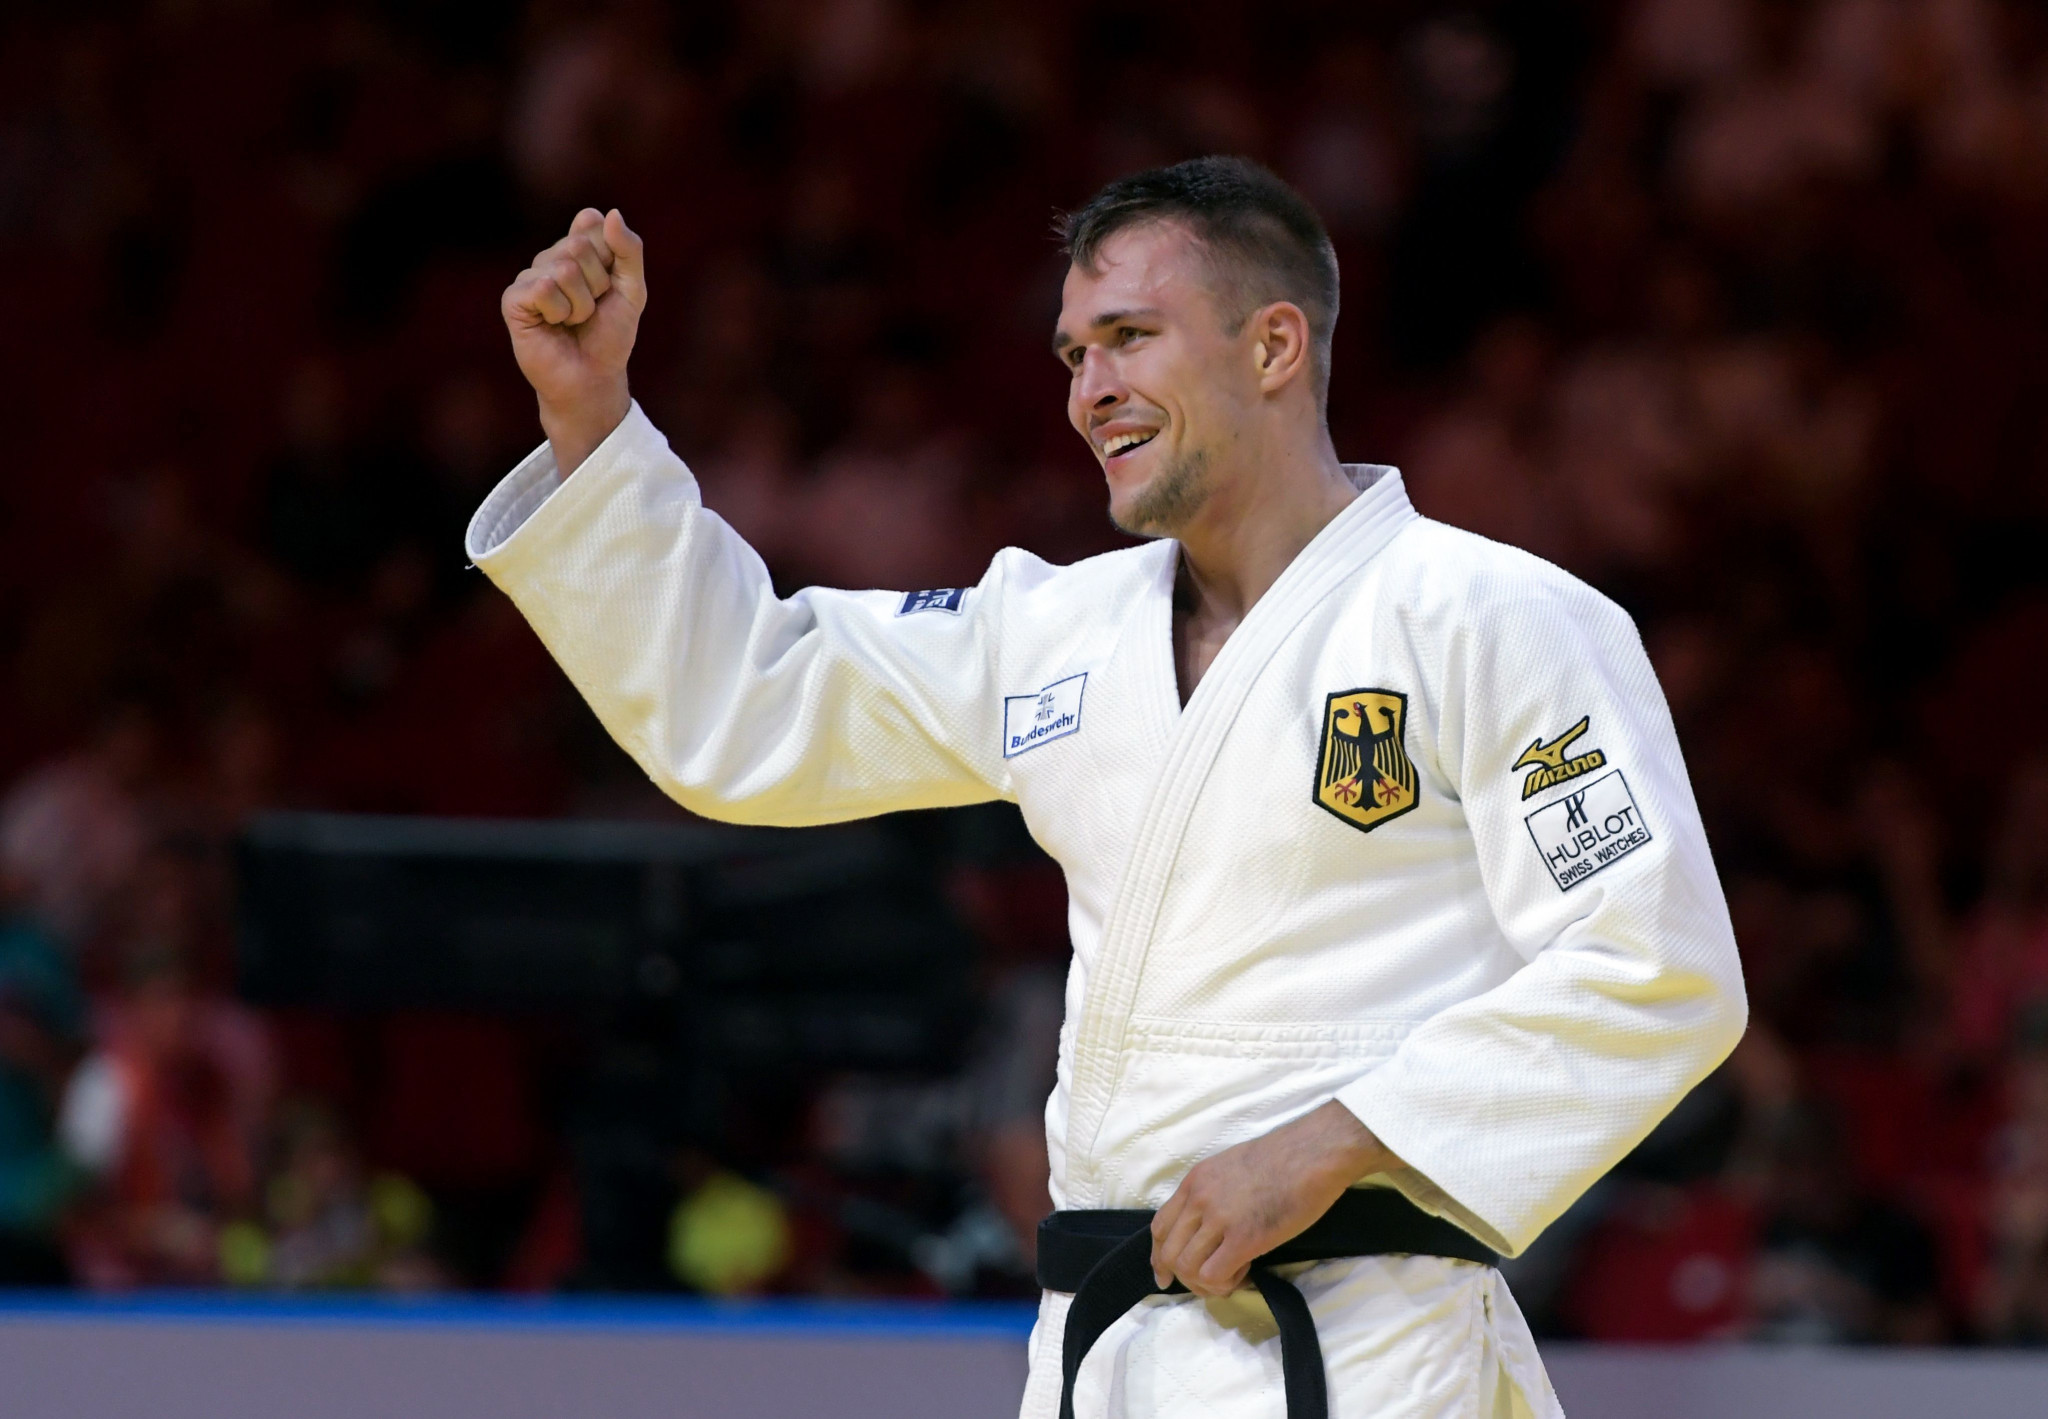 The German judoka claimed the gold medal by ippon ©Getty Images